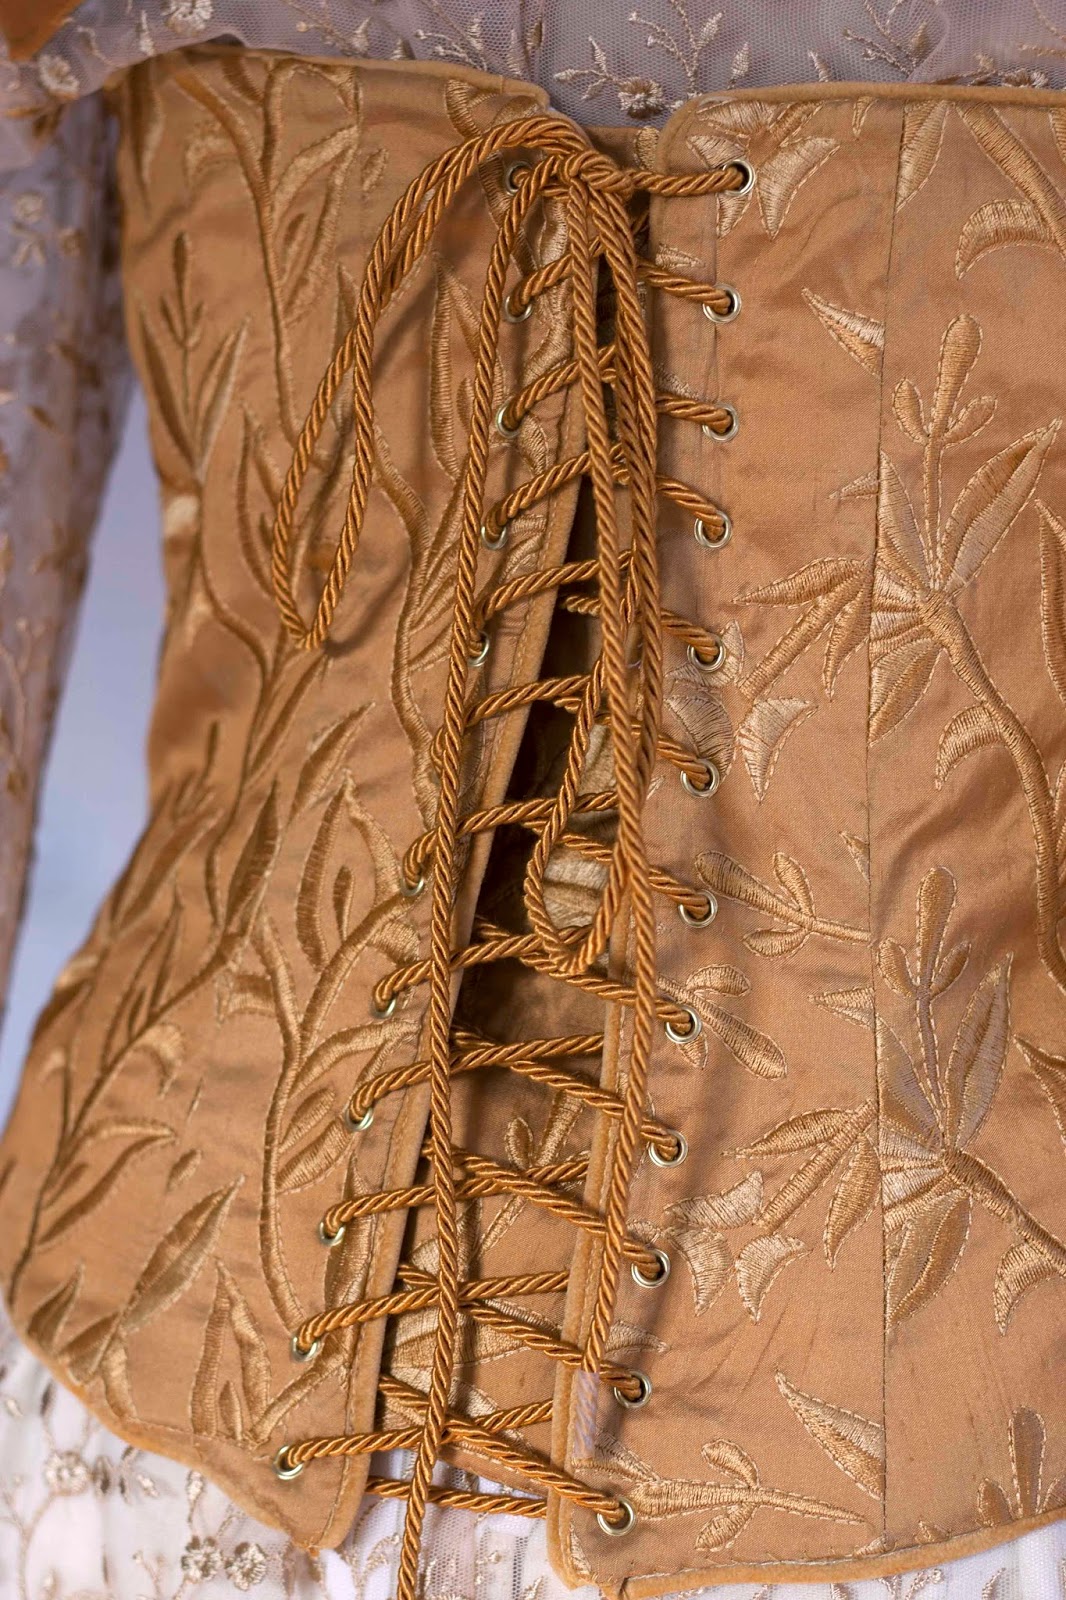 back view of corset with laces